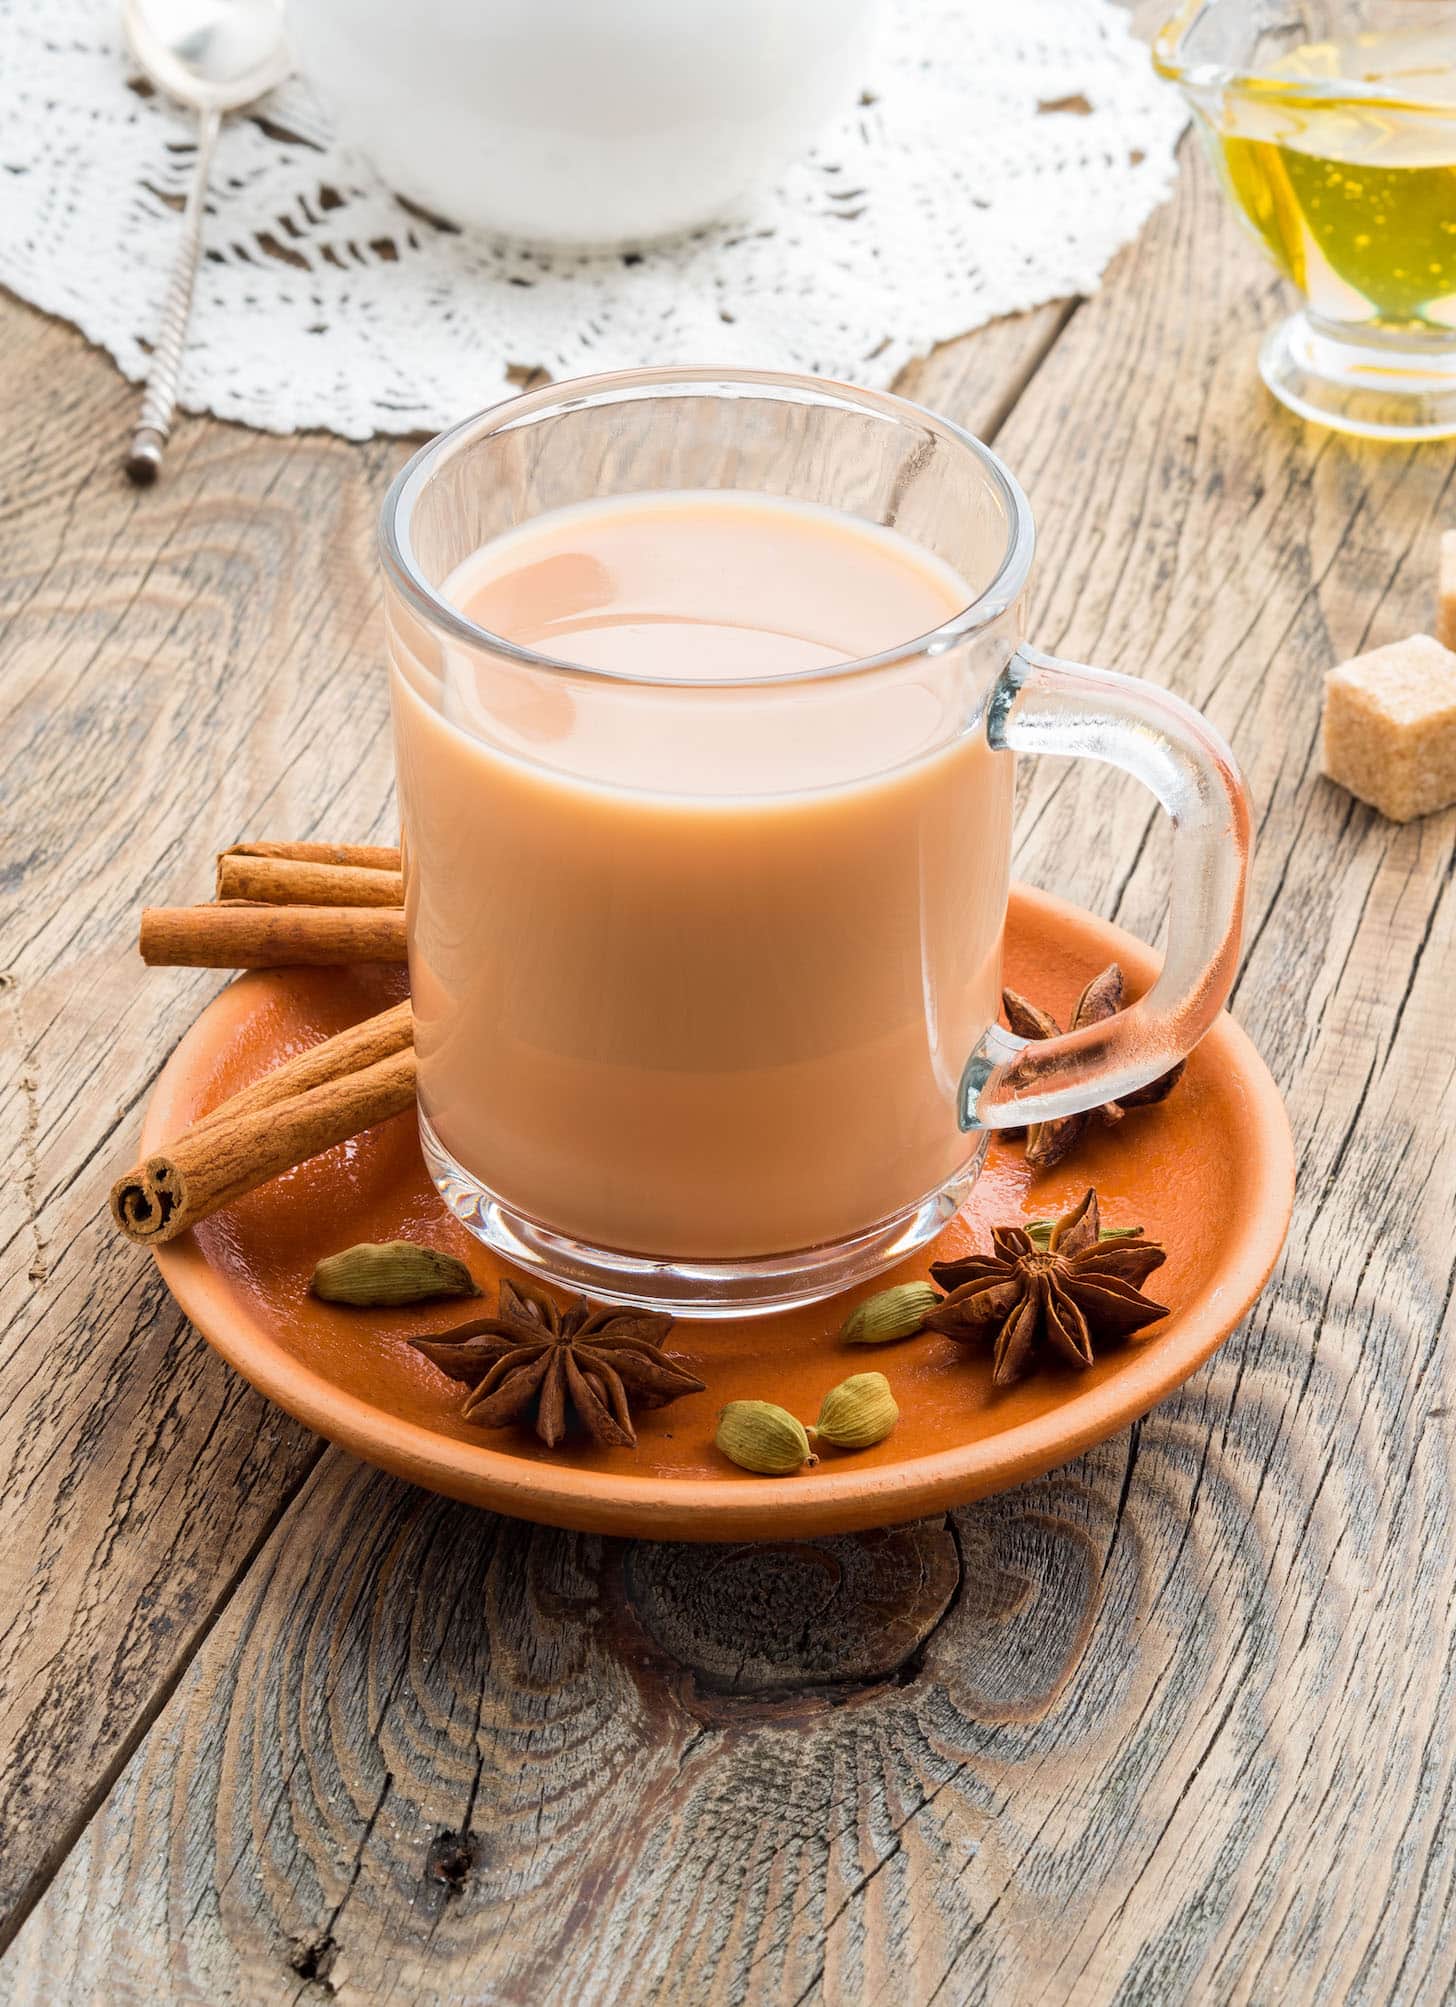 Masala Indian drink in the festival of Holi. Tea with milk and spices in a glass mug.